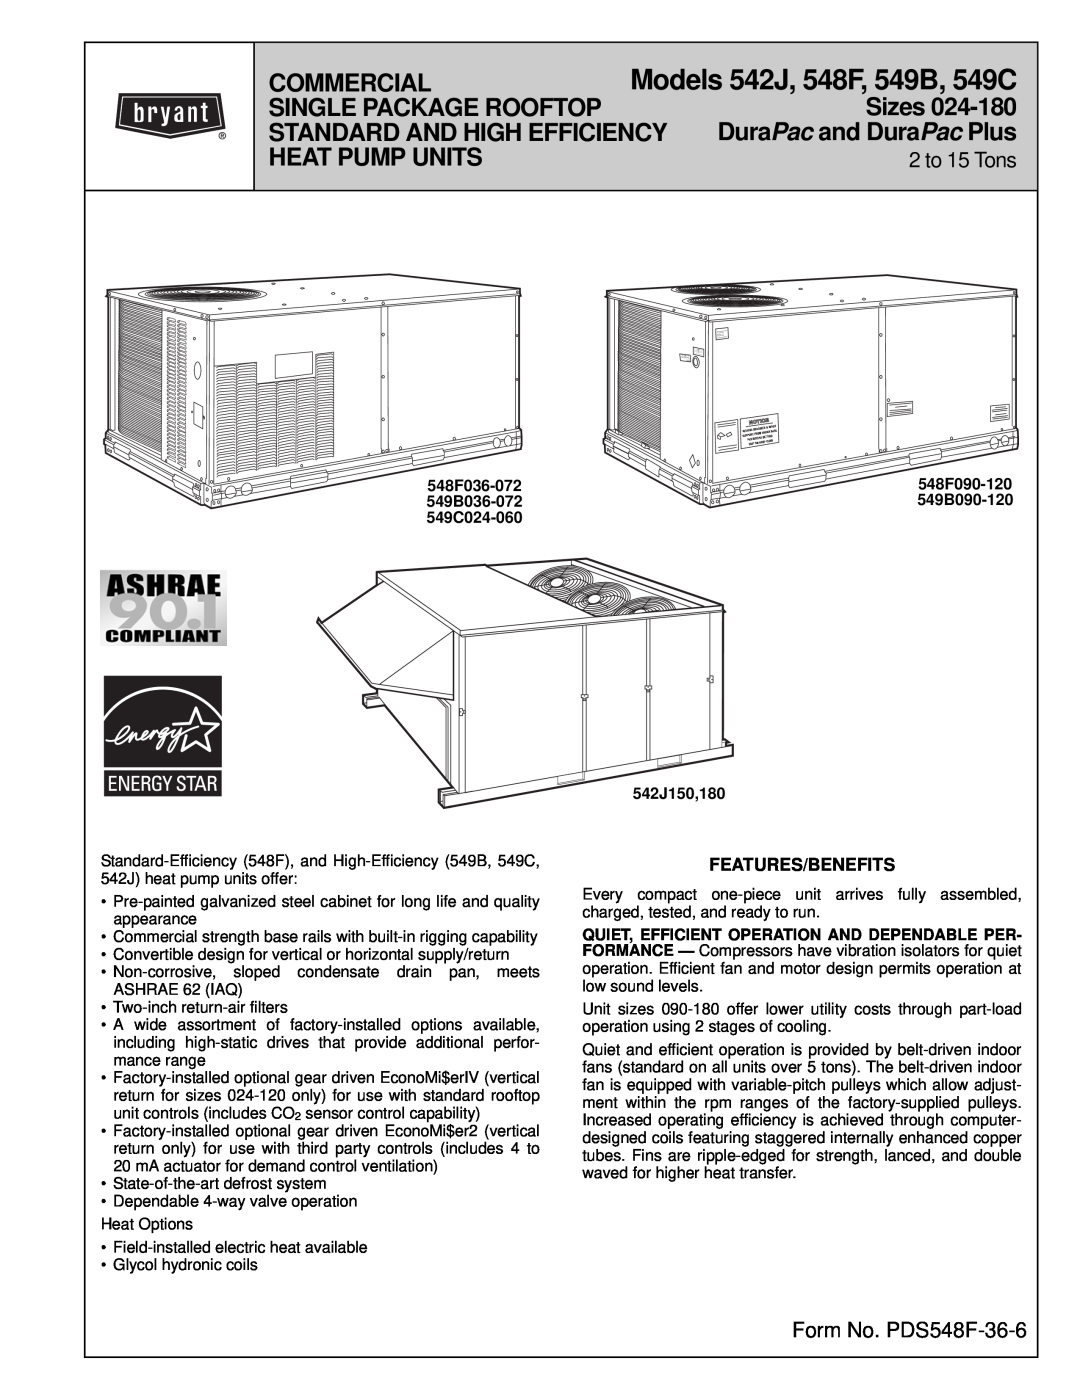 Bryant manual Features/Benefits, 542J150,180, Models 542J, 548F, 549B, 549C, Commercial, Single Package Rooftop, Sizes 